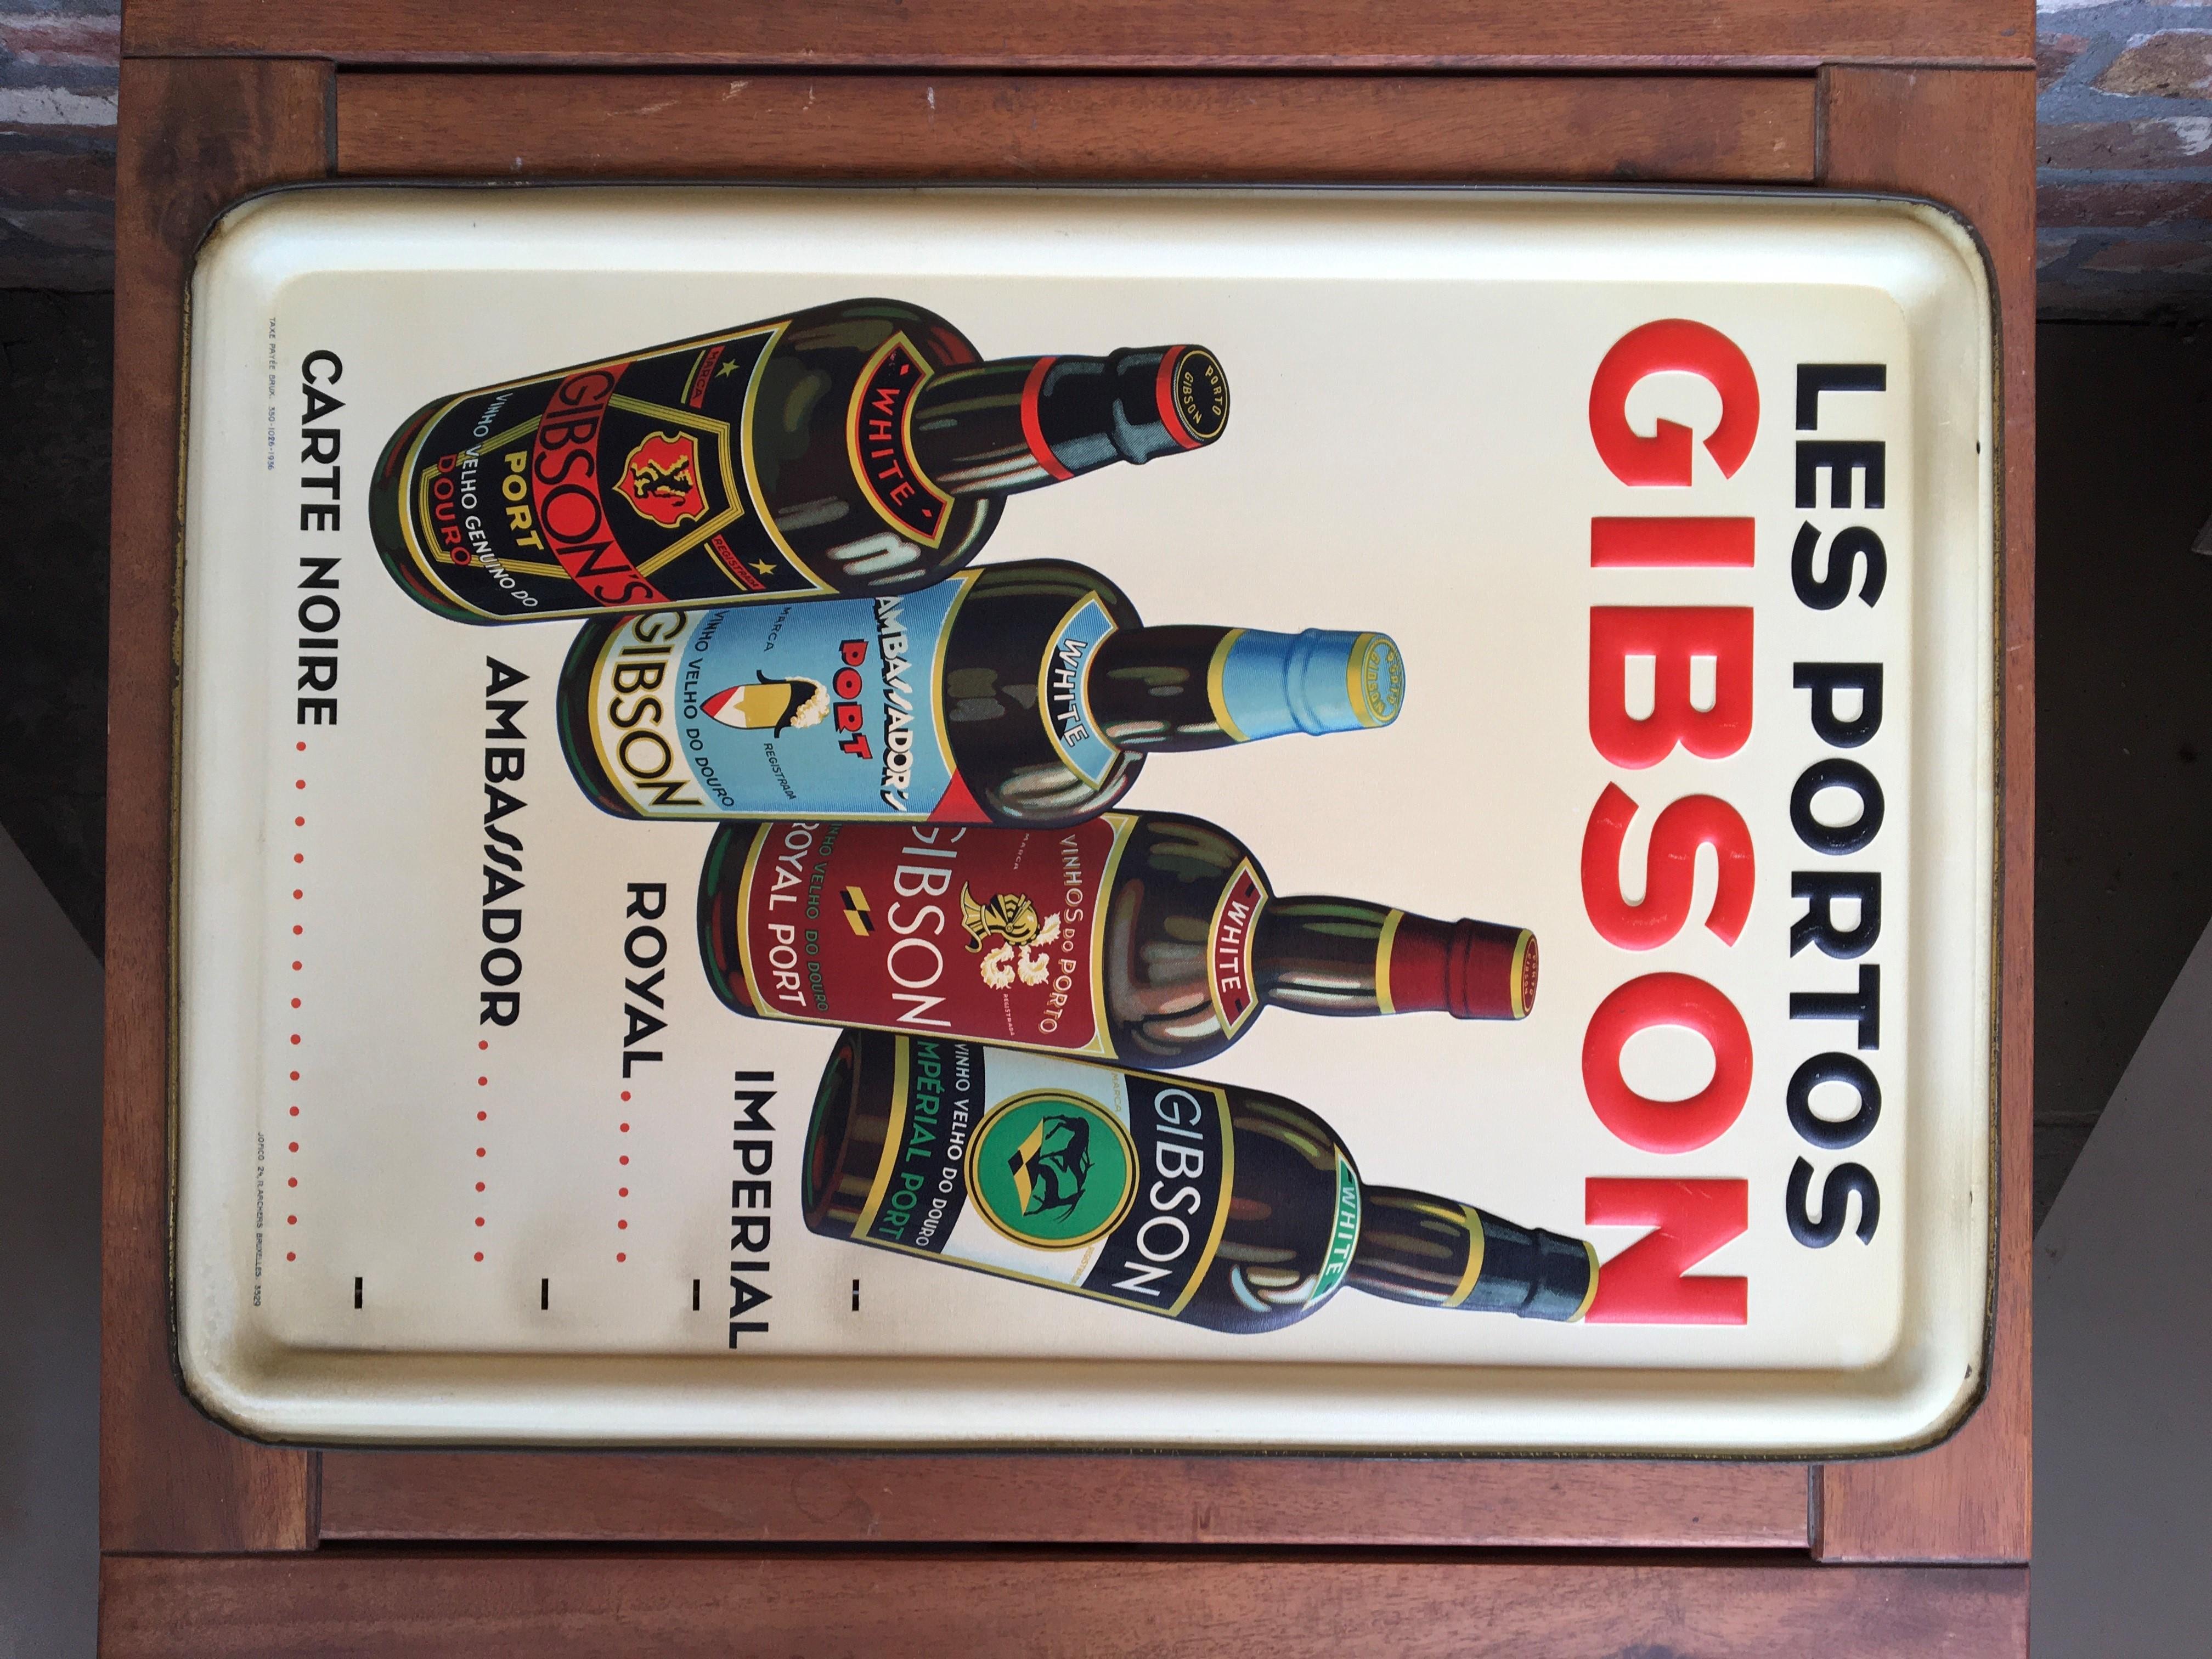 1936 Port Sign, Les Portos Gibson, an Appetizer Drink For Sale 1